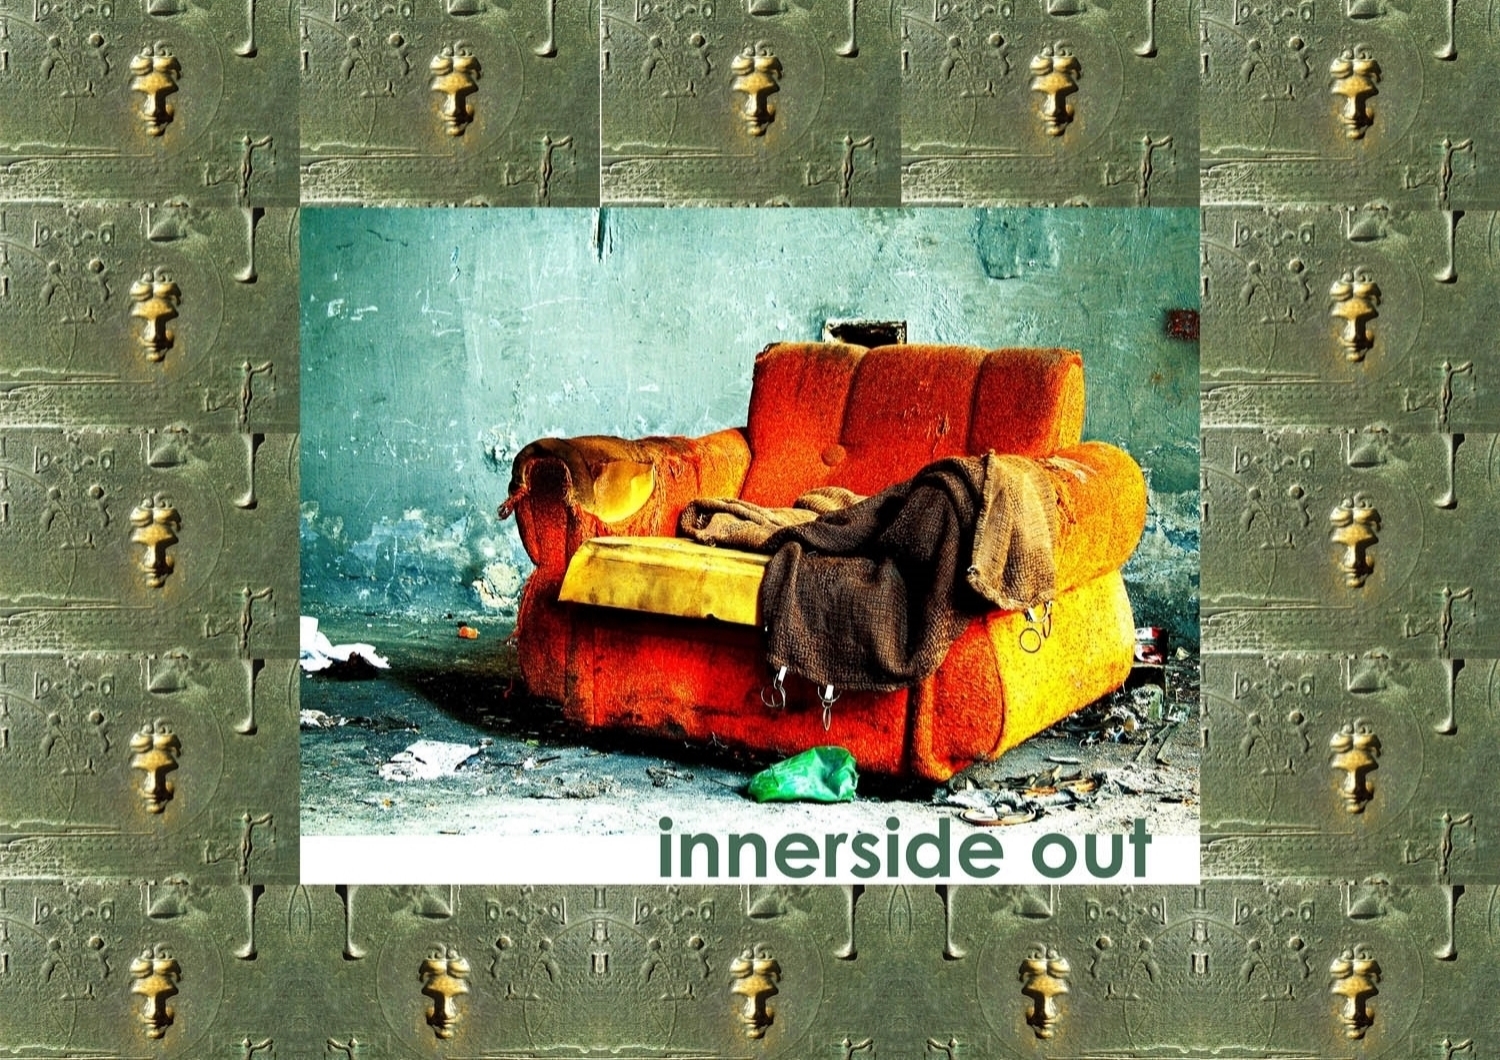 innerside out